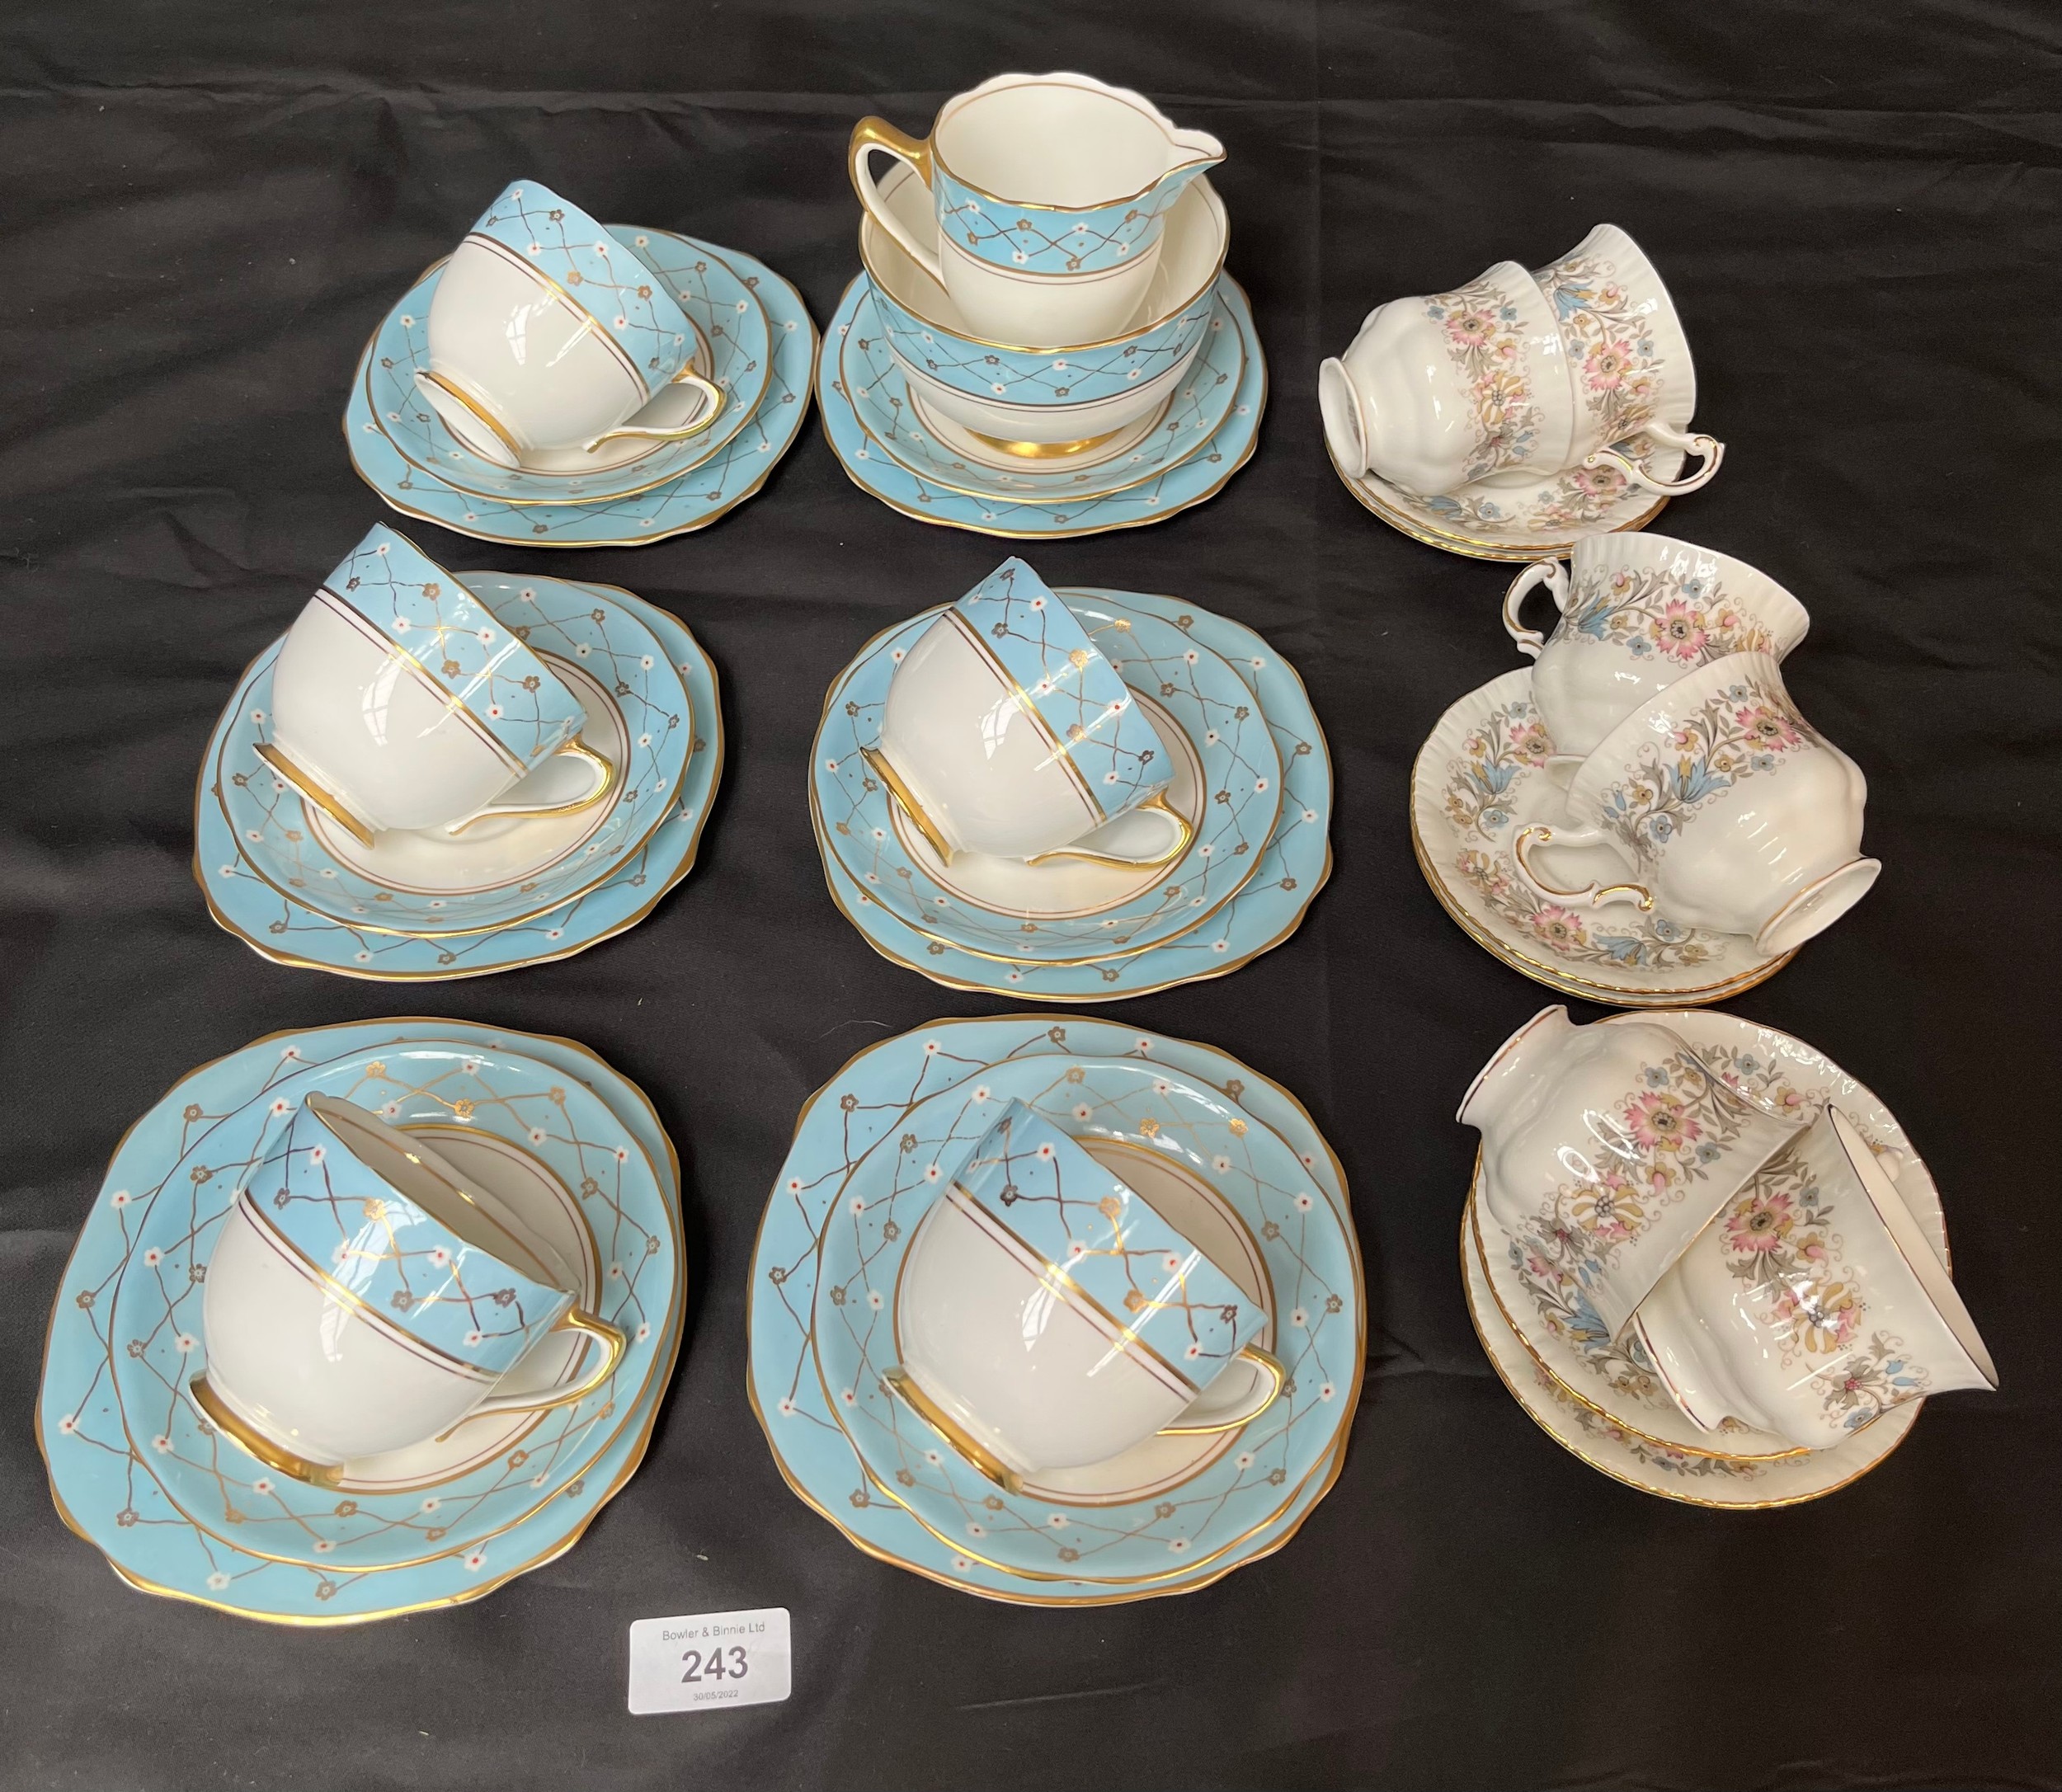 An 18 piece Royal Stafford tea set together with a 12 piece Paragon Meadowvale coffee set.